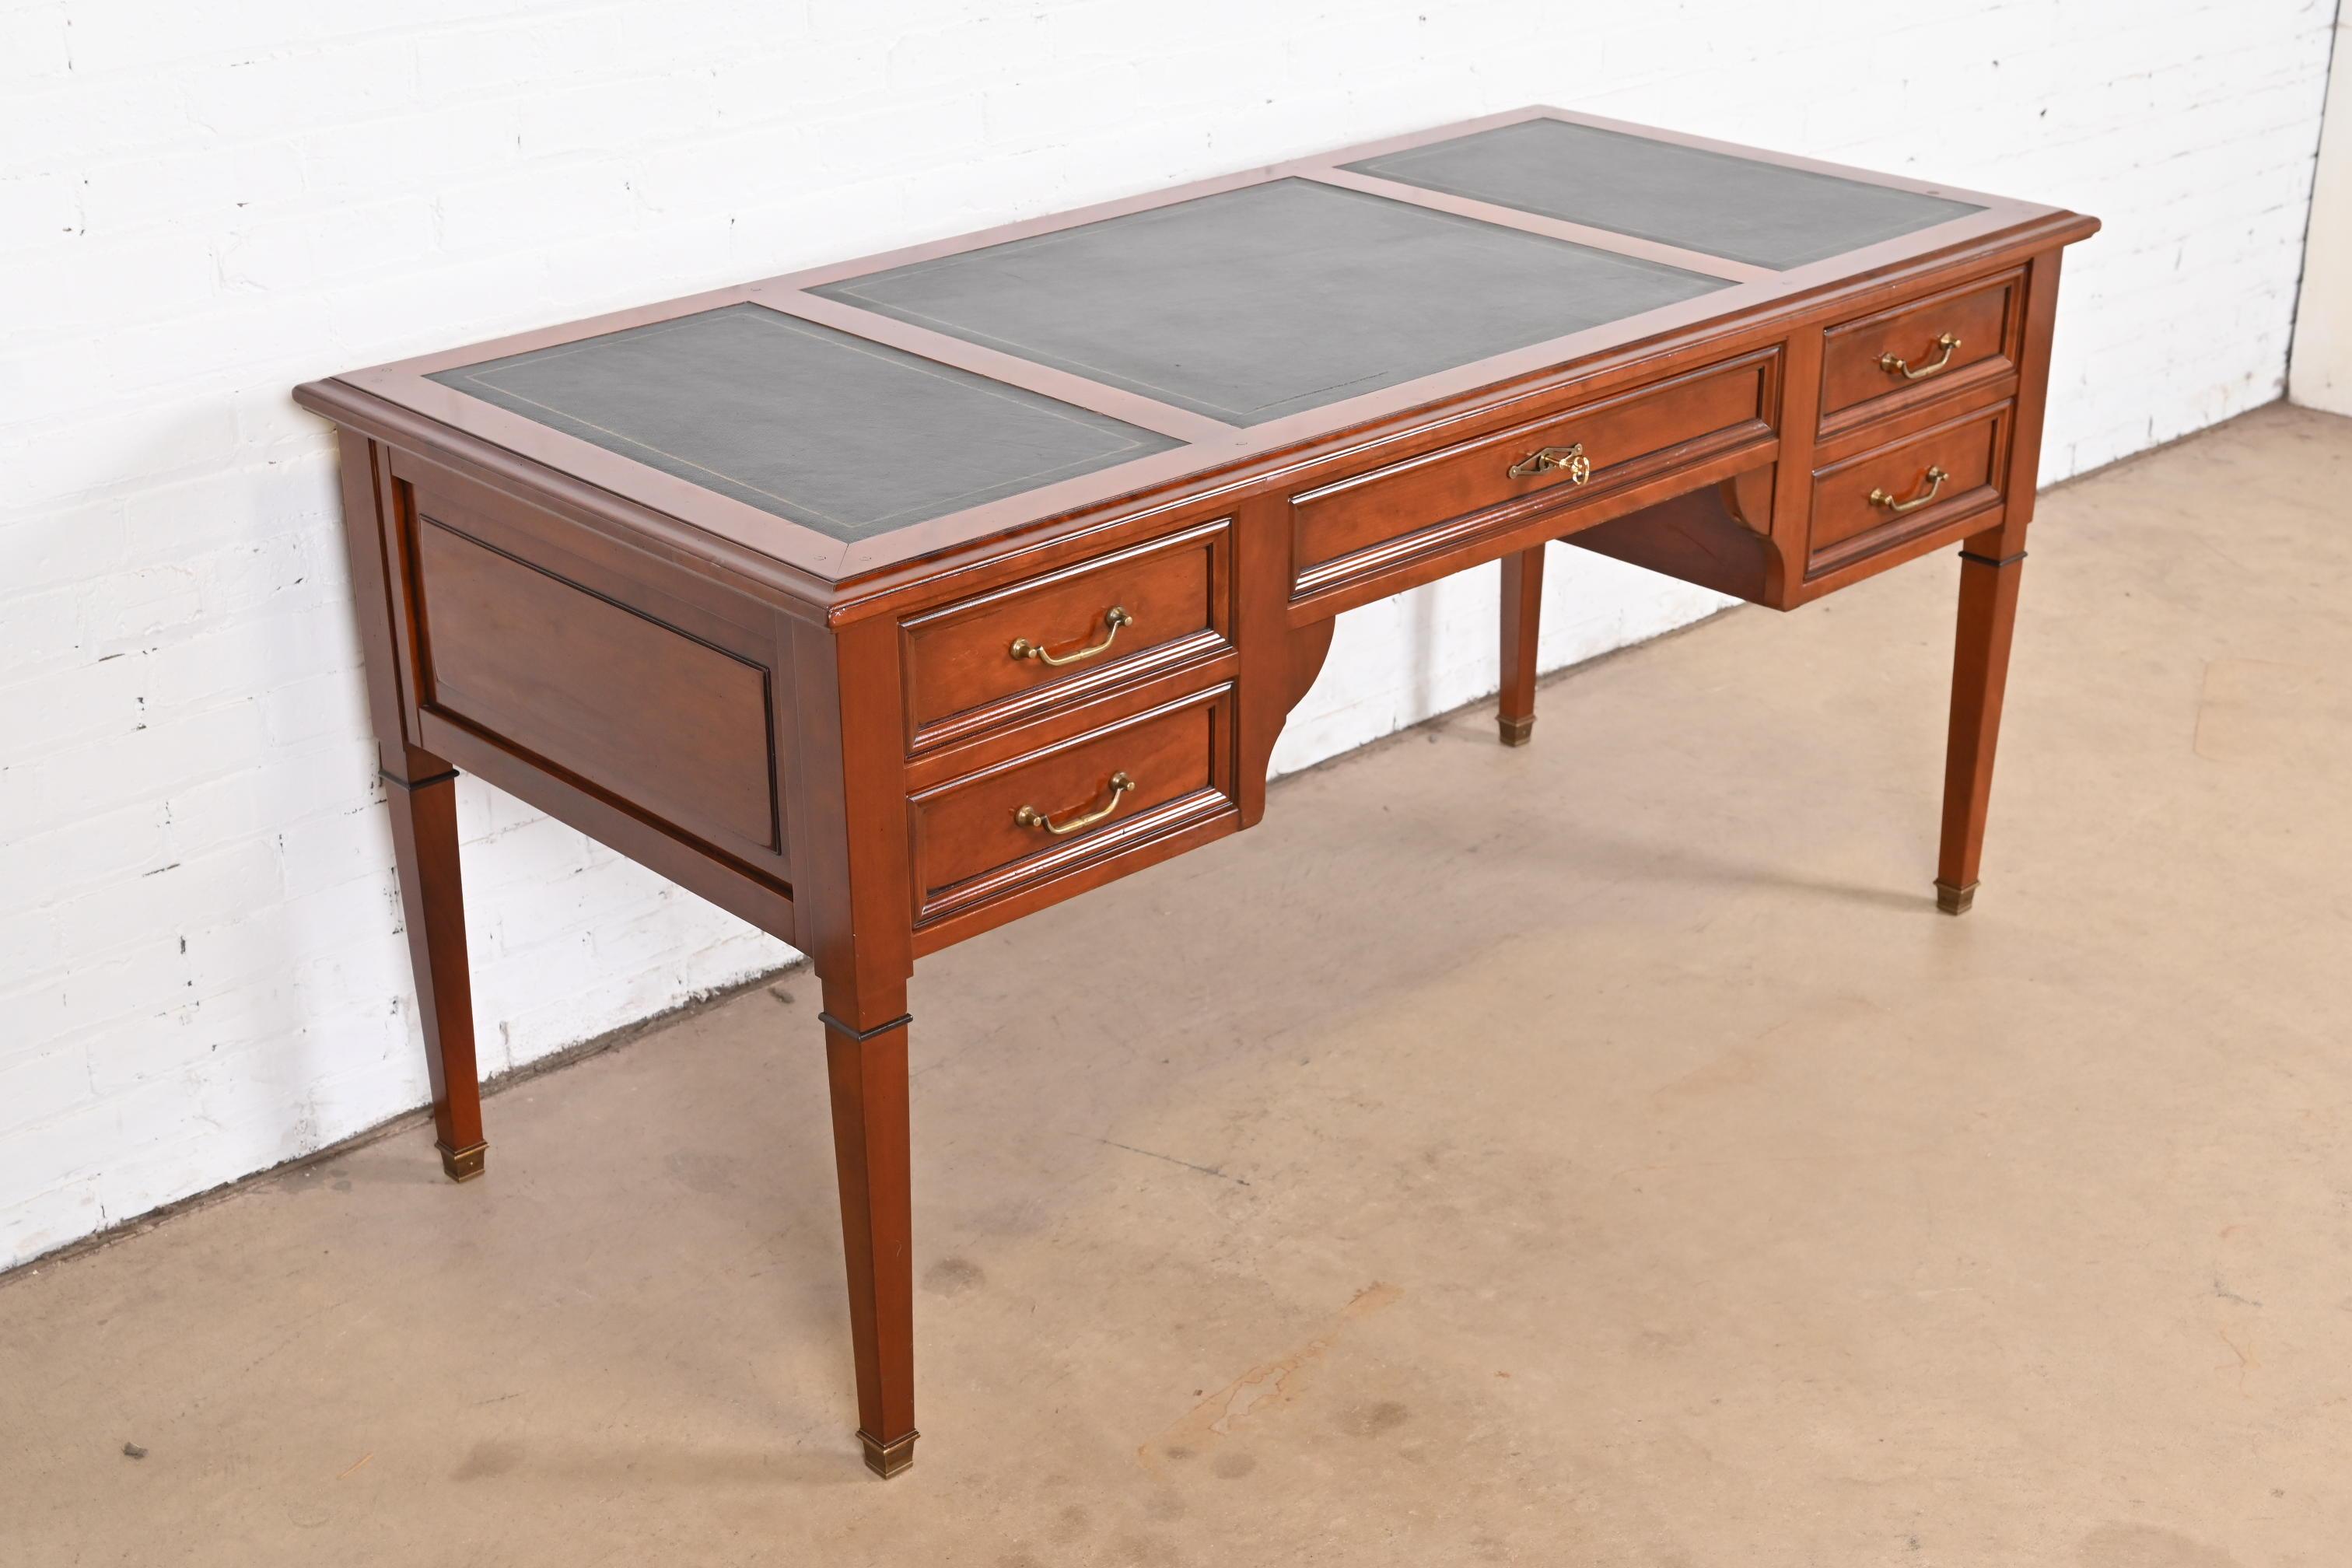 Grange French Regency Louis XVI Cherry Wood Leather Top Writing Desk In Good Condition For Sale In South Bend, IN